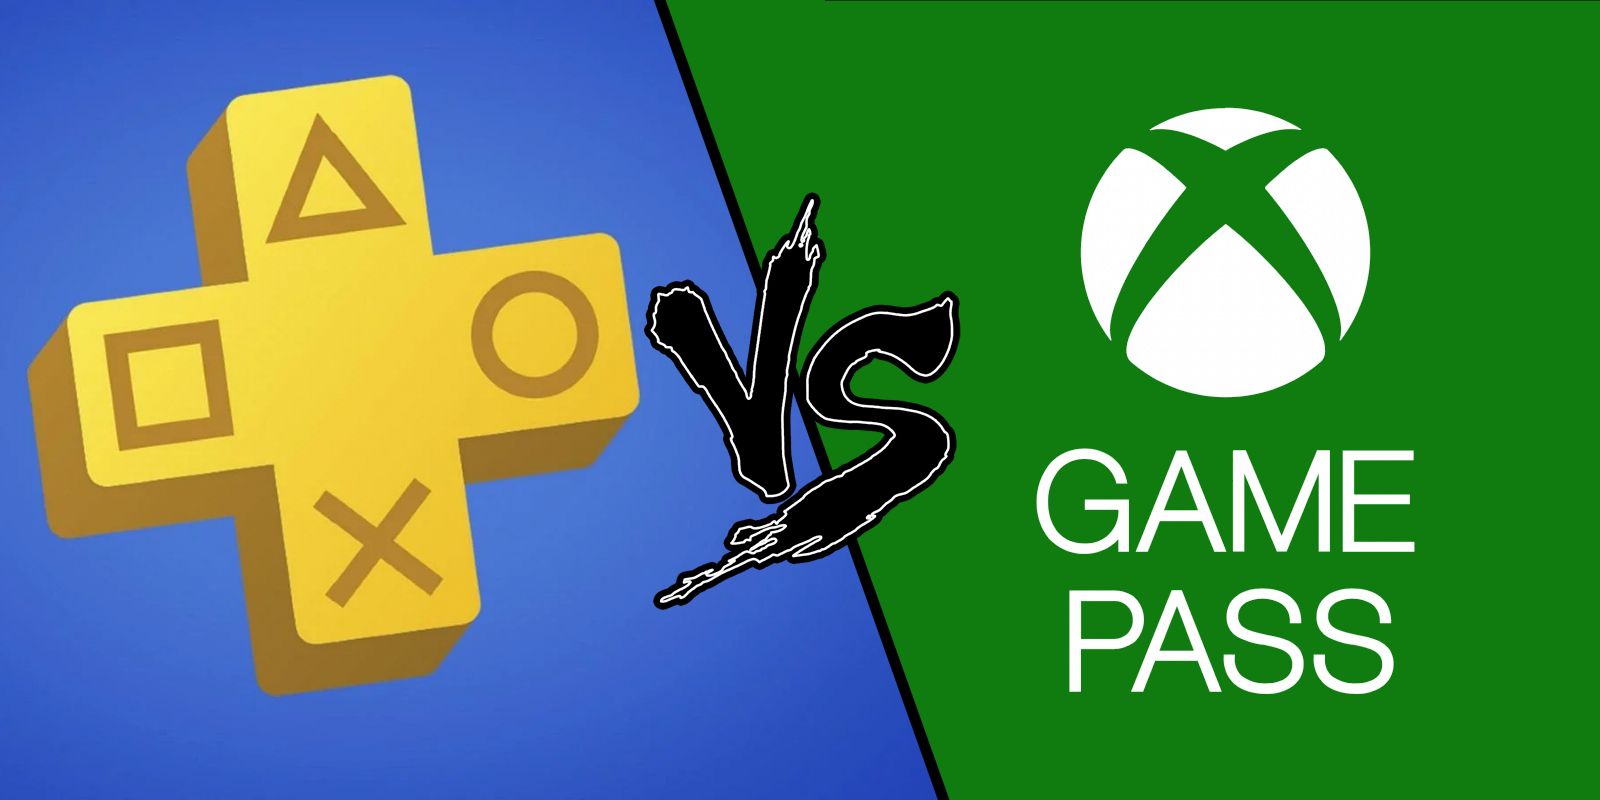 PlayStation Plus subscription price has been increased: is the new price  worth it compared to Xbox Game Pass? - MSPoweruser